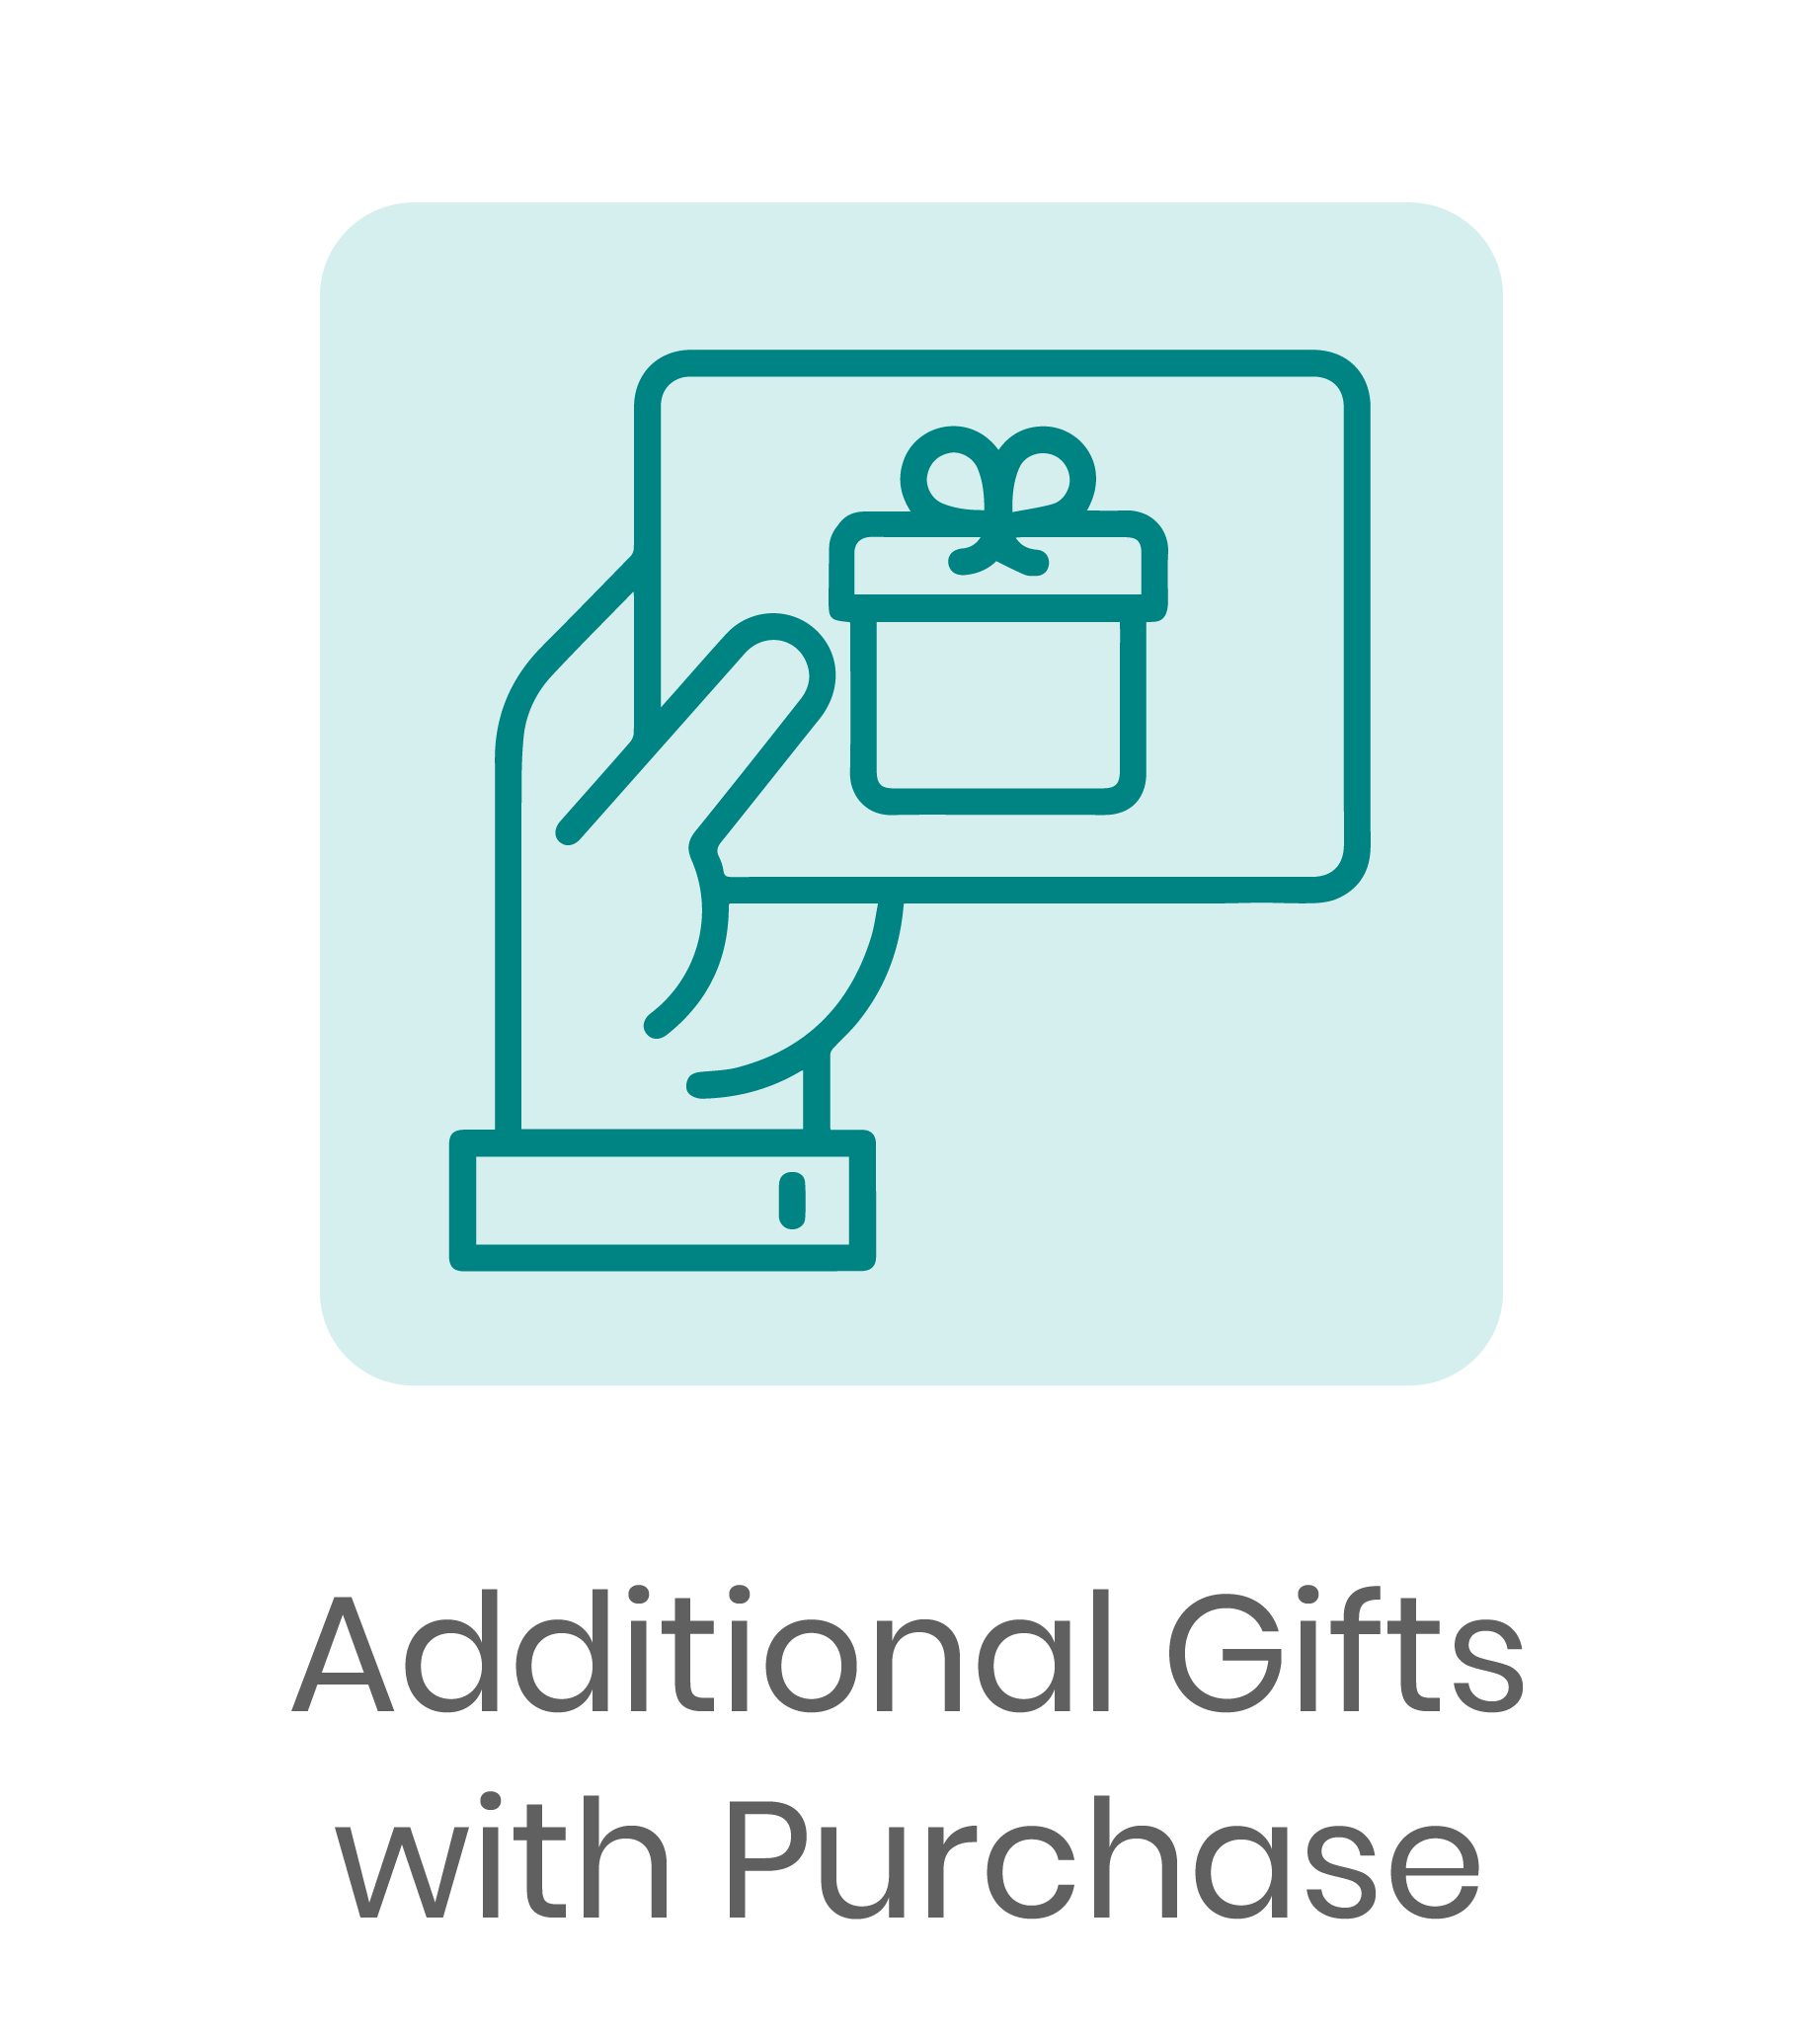 Additional Gifts with Purchase